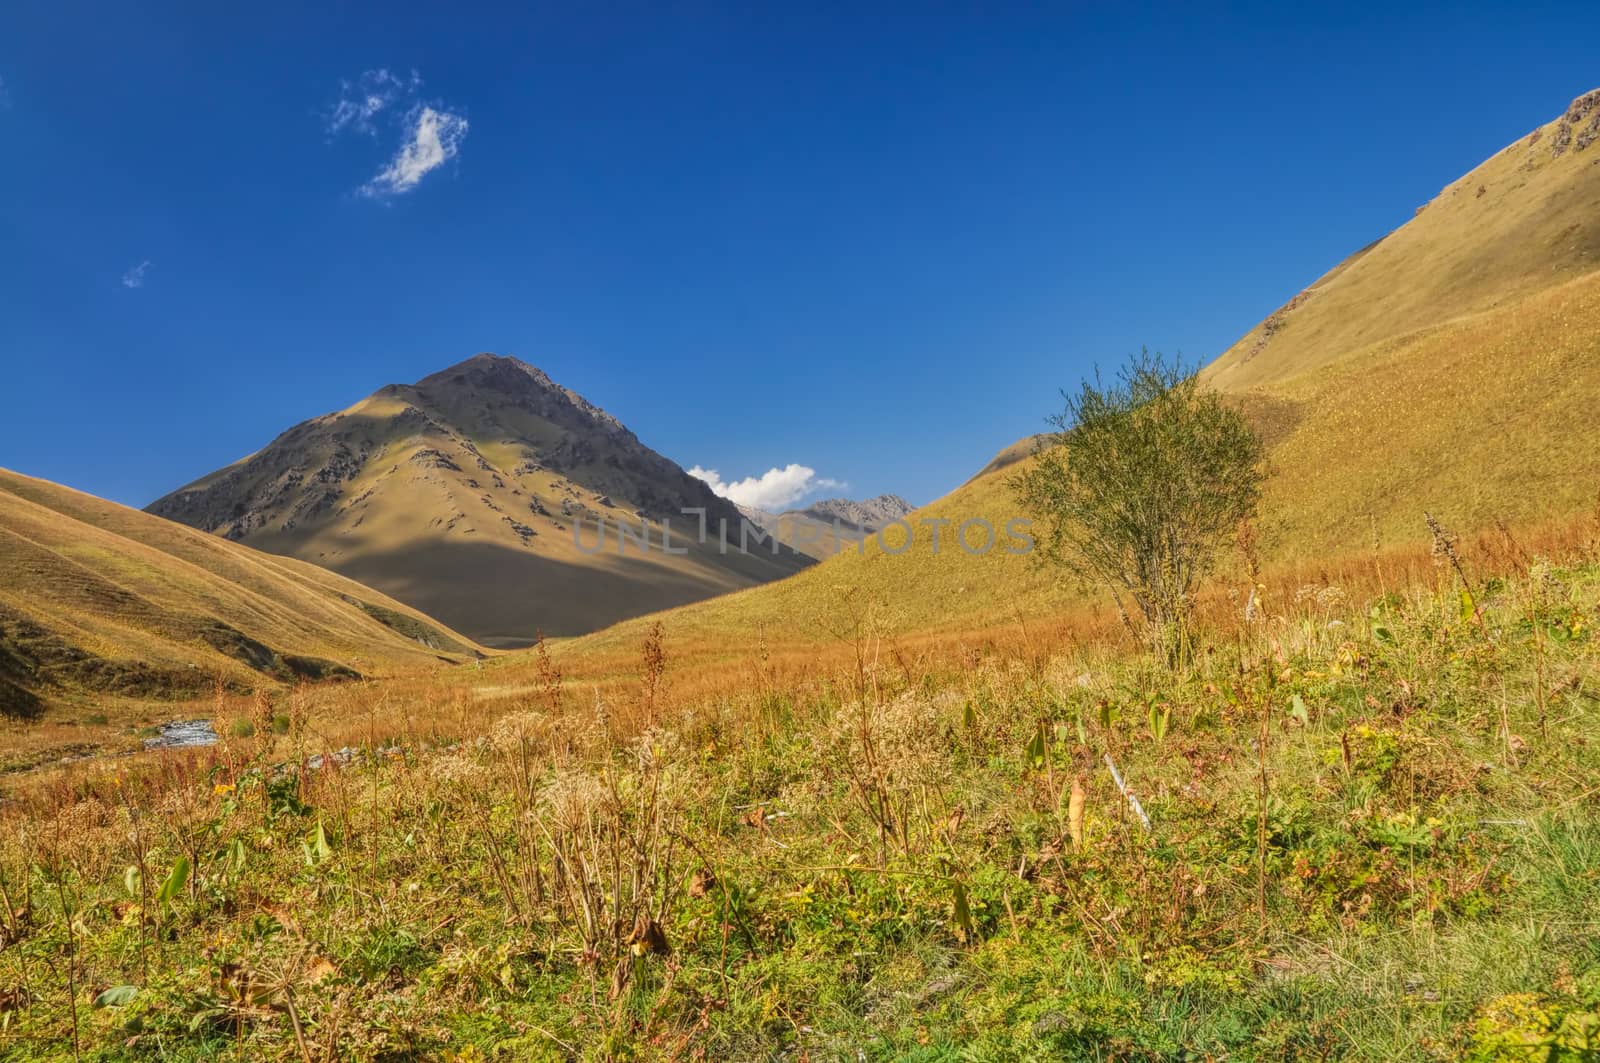 Picturesque green hills in Ala Archa national park in Tian Shan mountain range in Kyrgyzstan